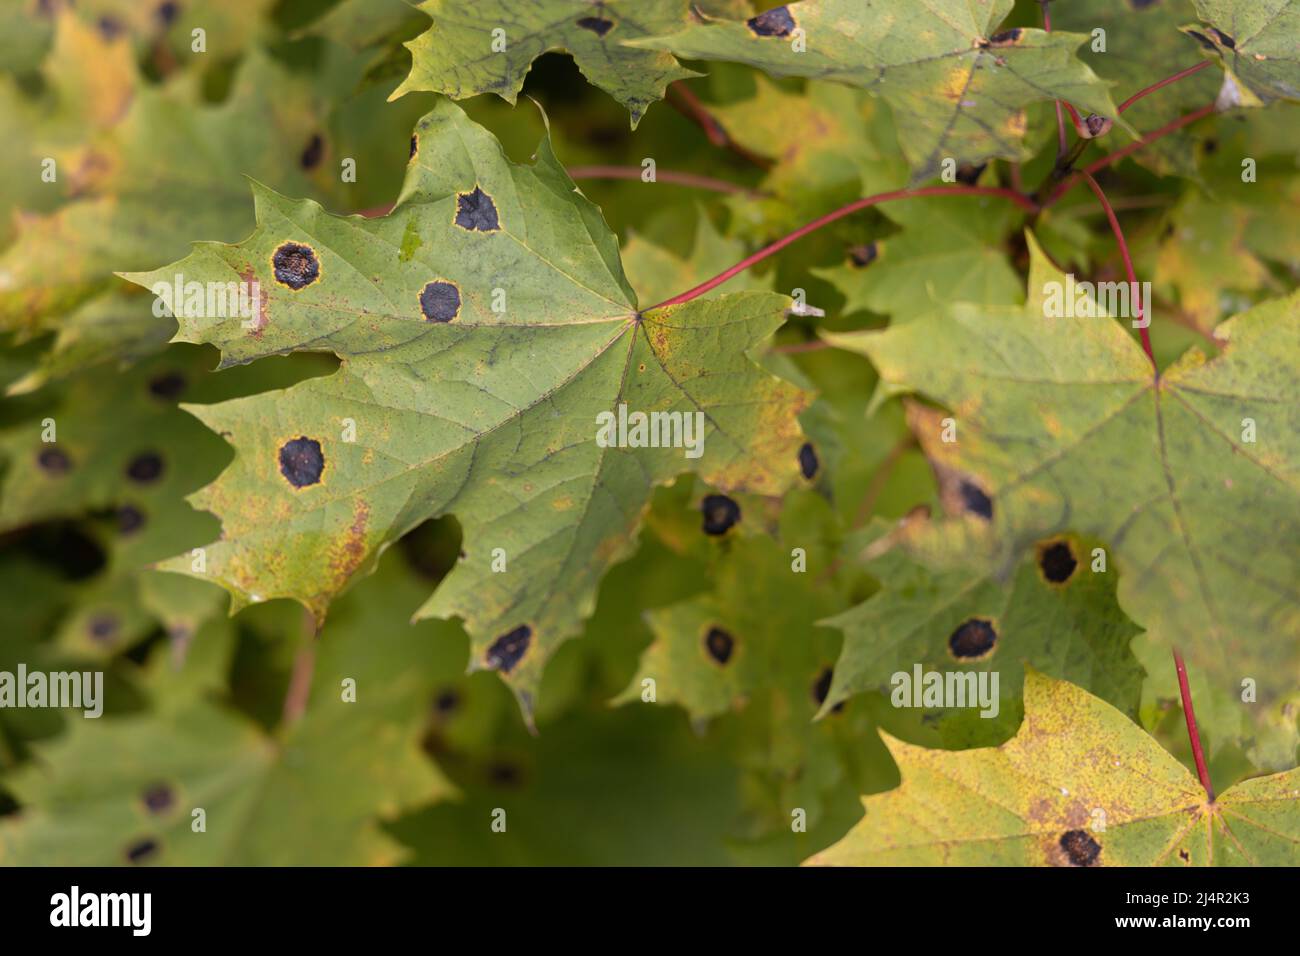 Infected maple leaf with a plant pathogen Rhytisma acerinum close-up Stock Photo